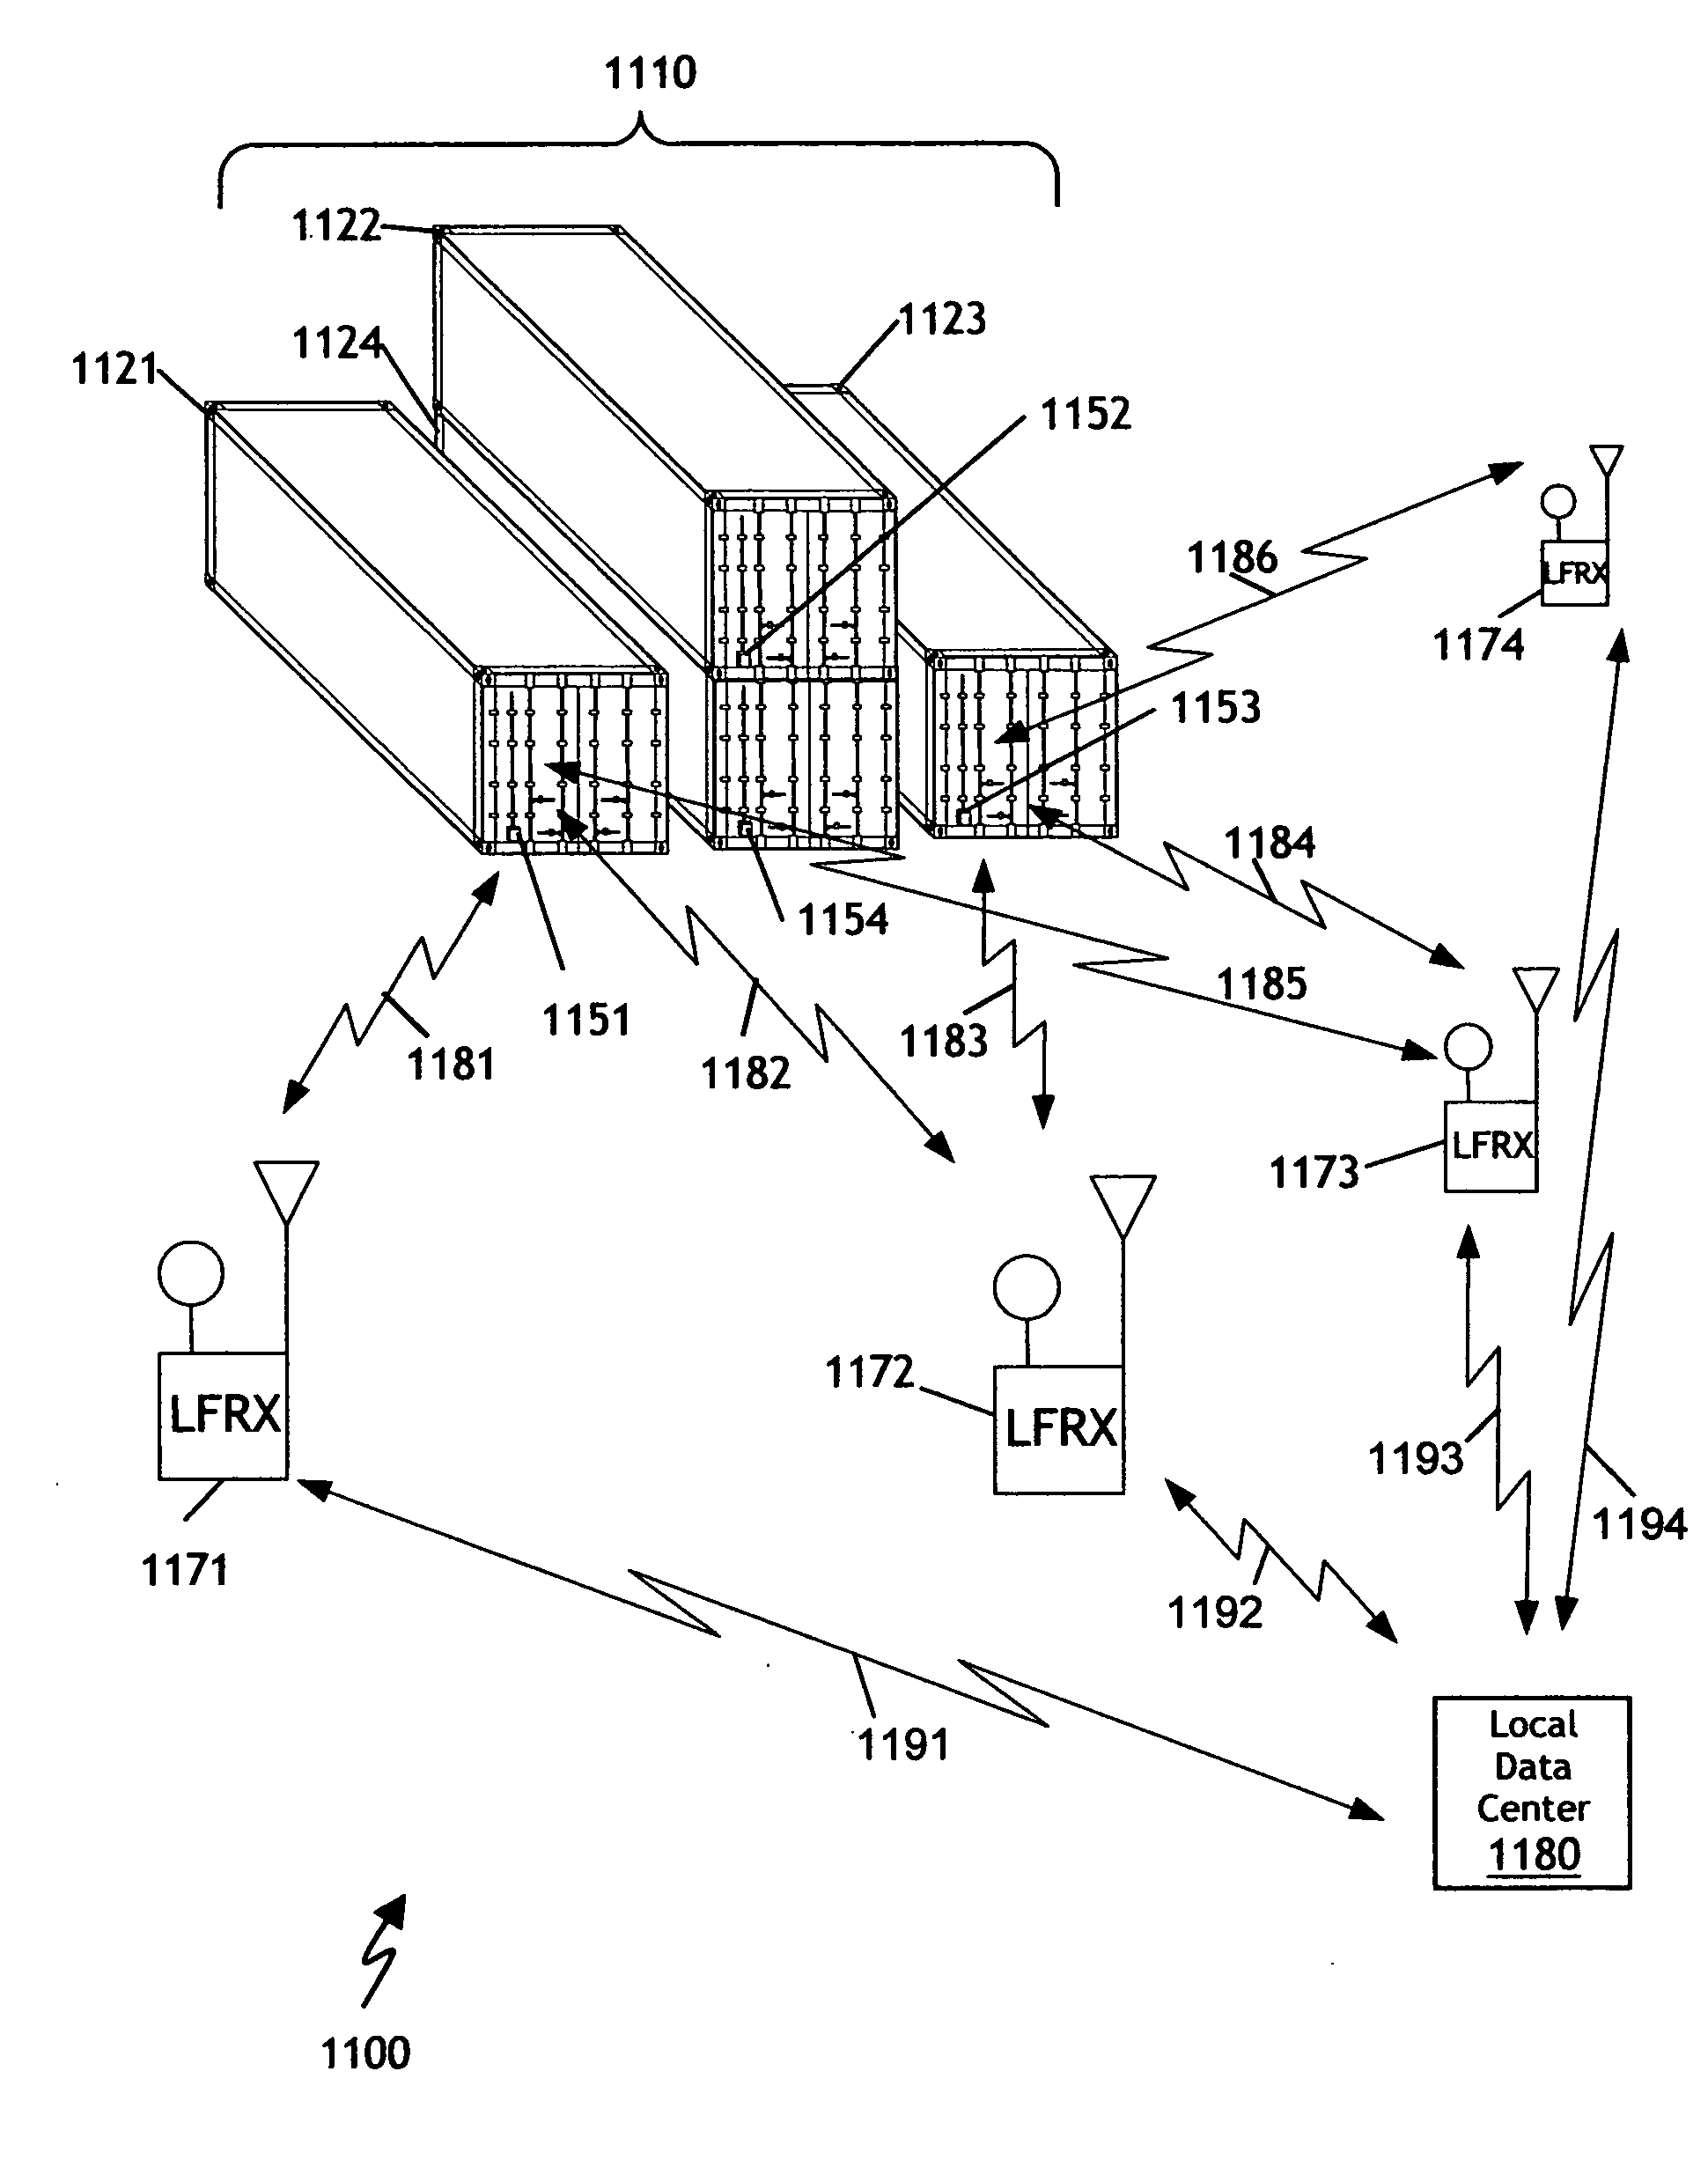 Low frequency asset tag tracking system and method